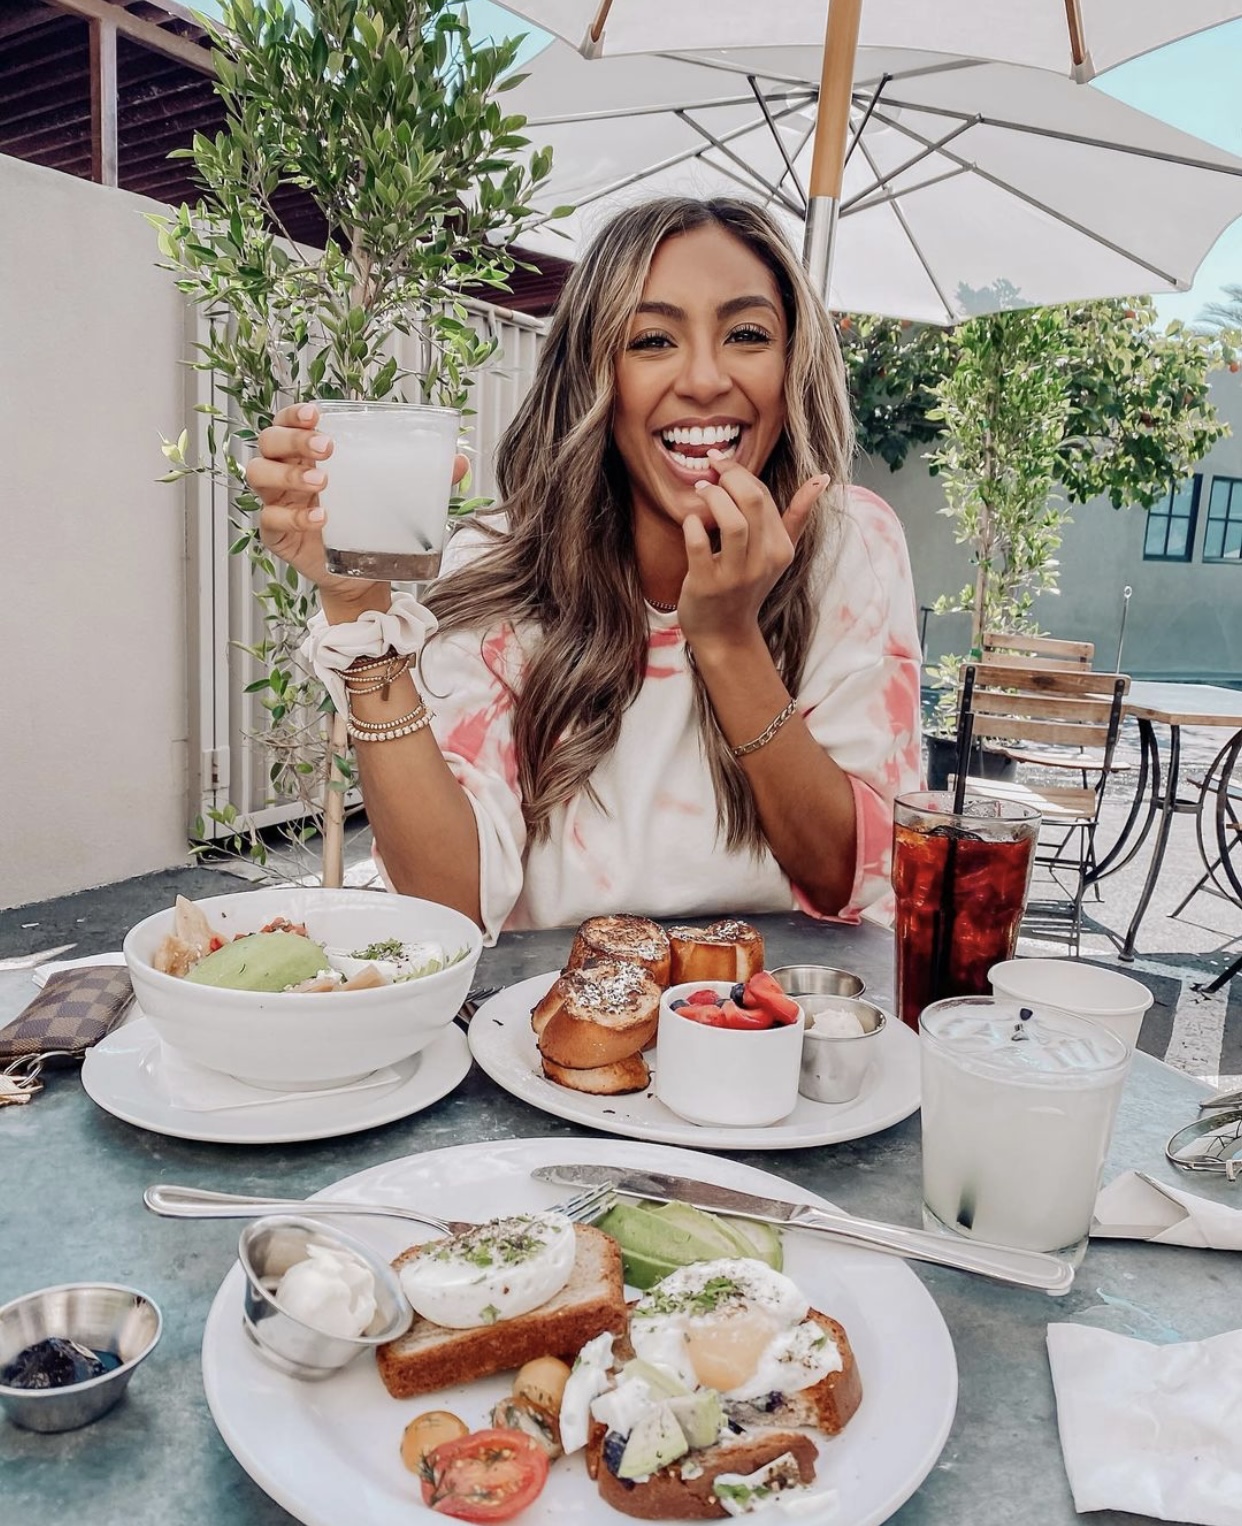 Tayshia Adams poses for a photo during a meal